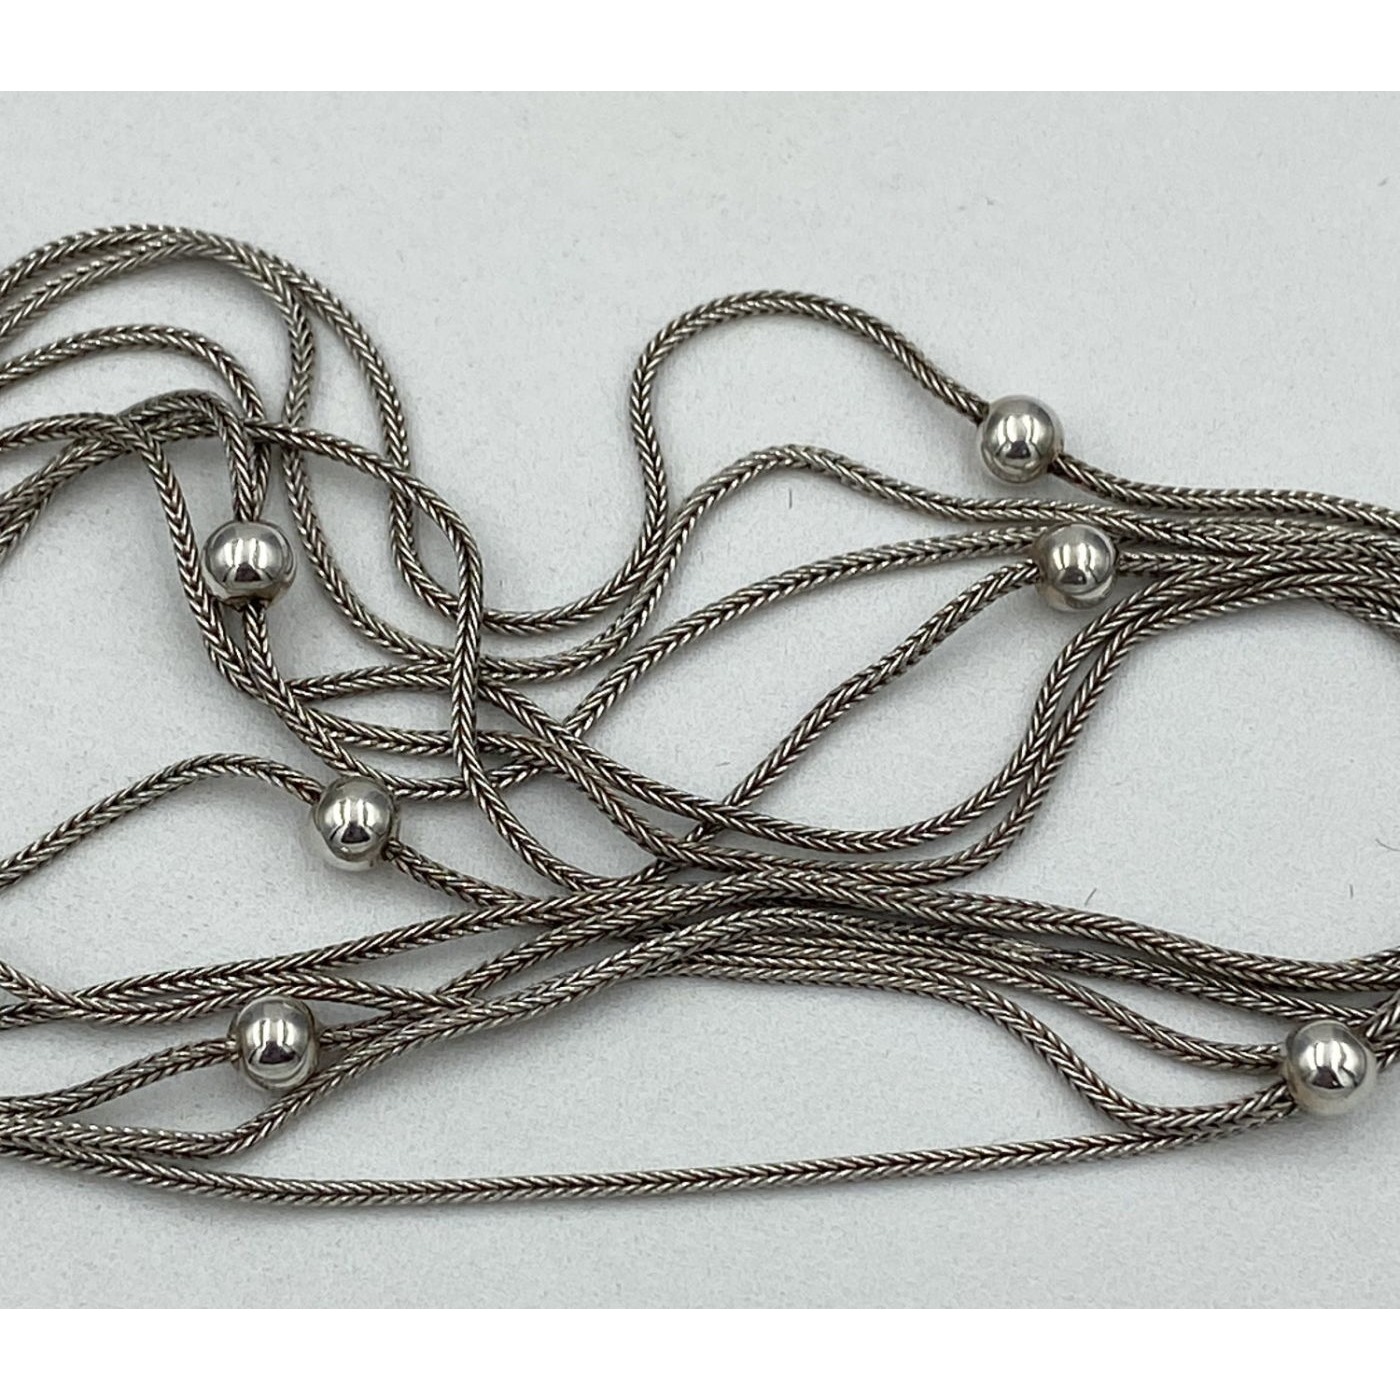 Lovely 51" Long Sterling Silver Chain with Interspersed Balls